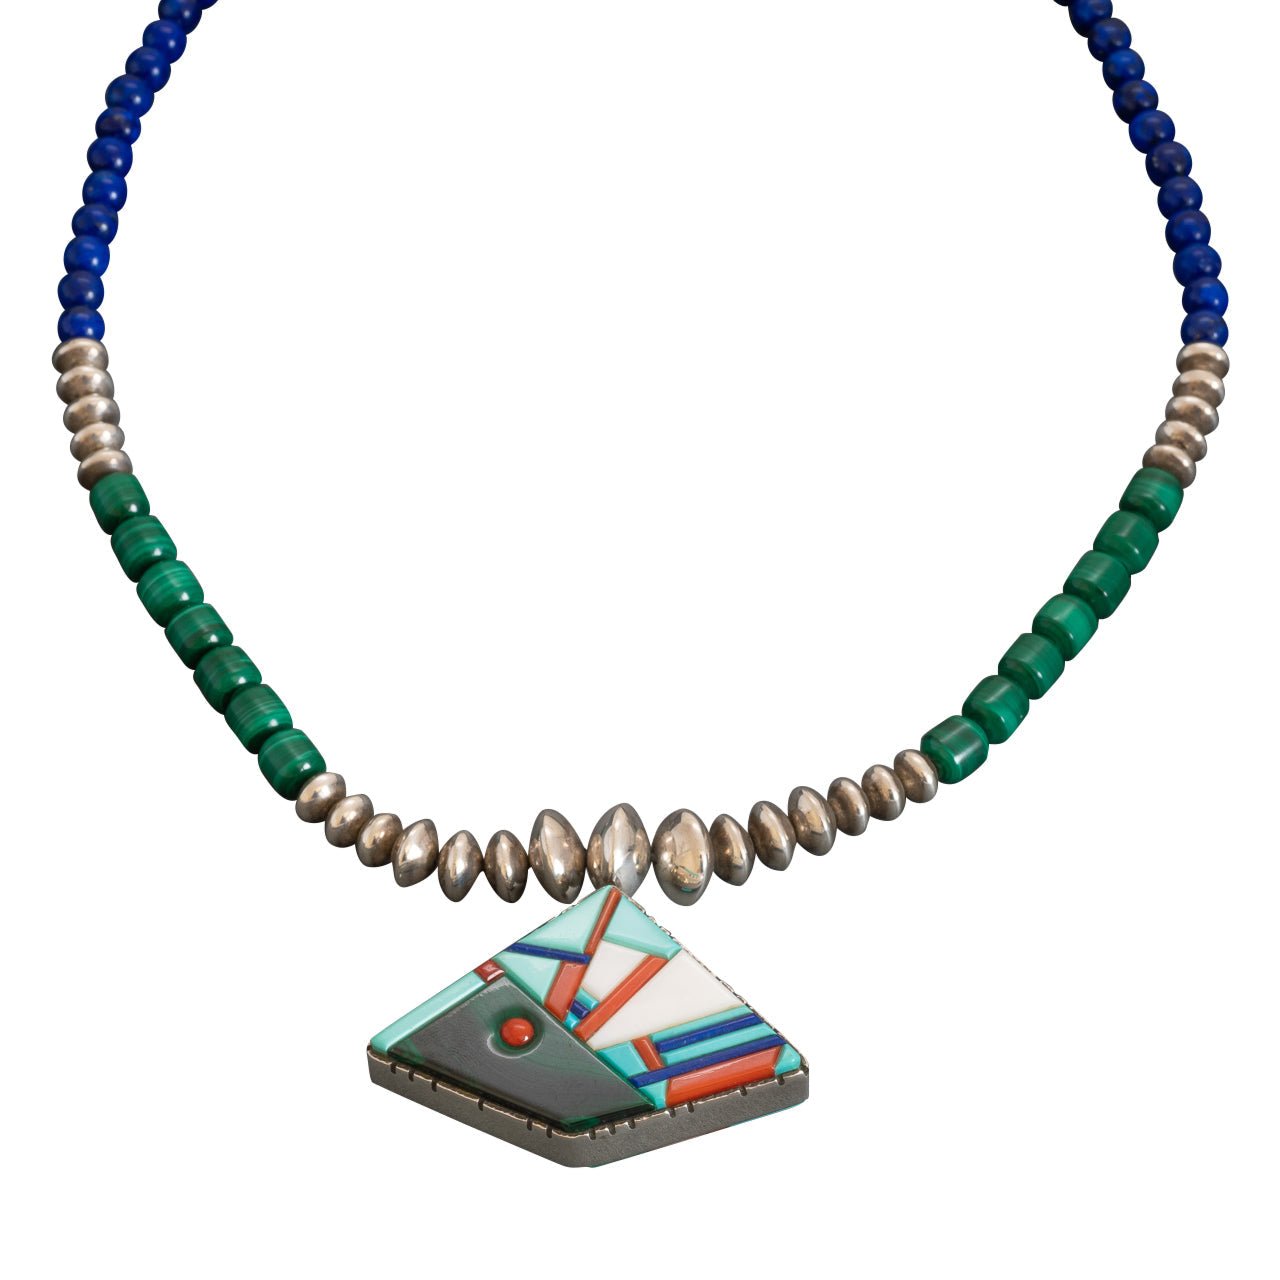 Beaded Necklace By Richard Tsosie With Dual Sided Inlay Pendant - Turquoise & Tufa